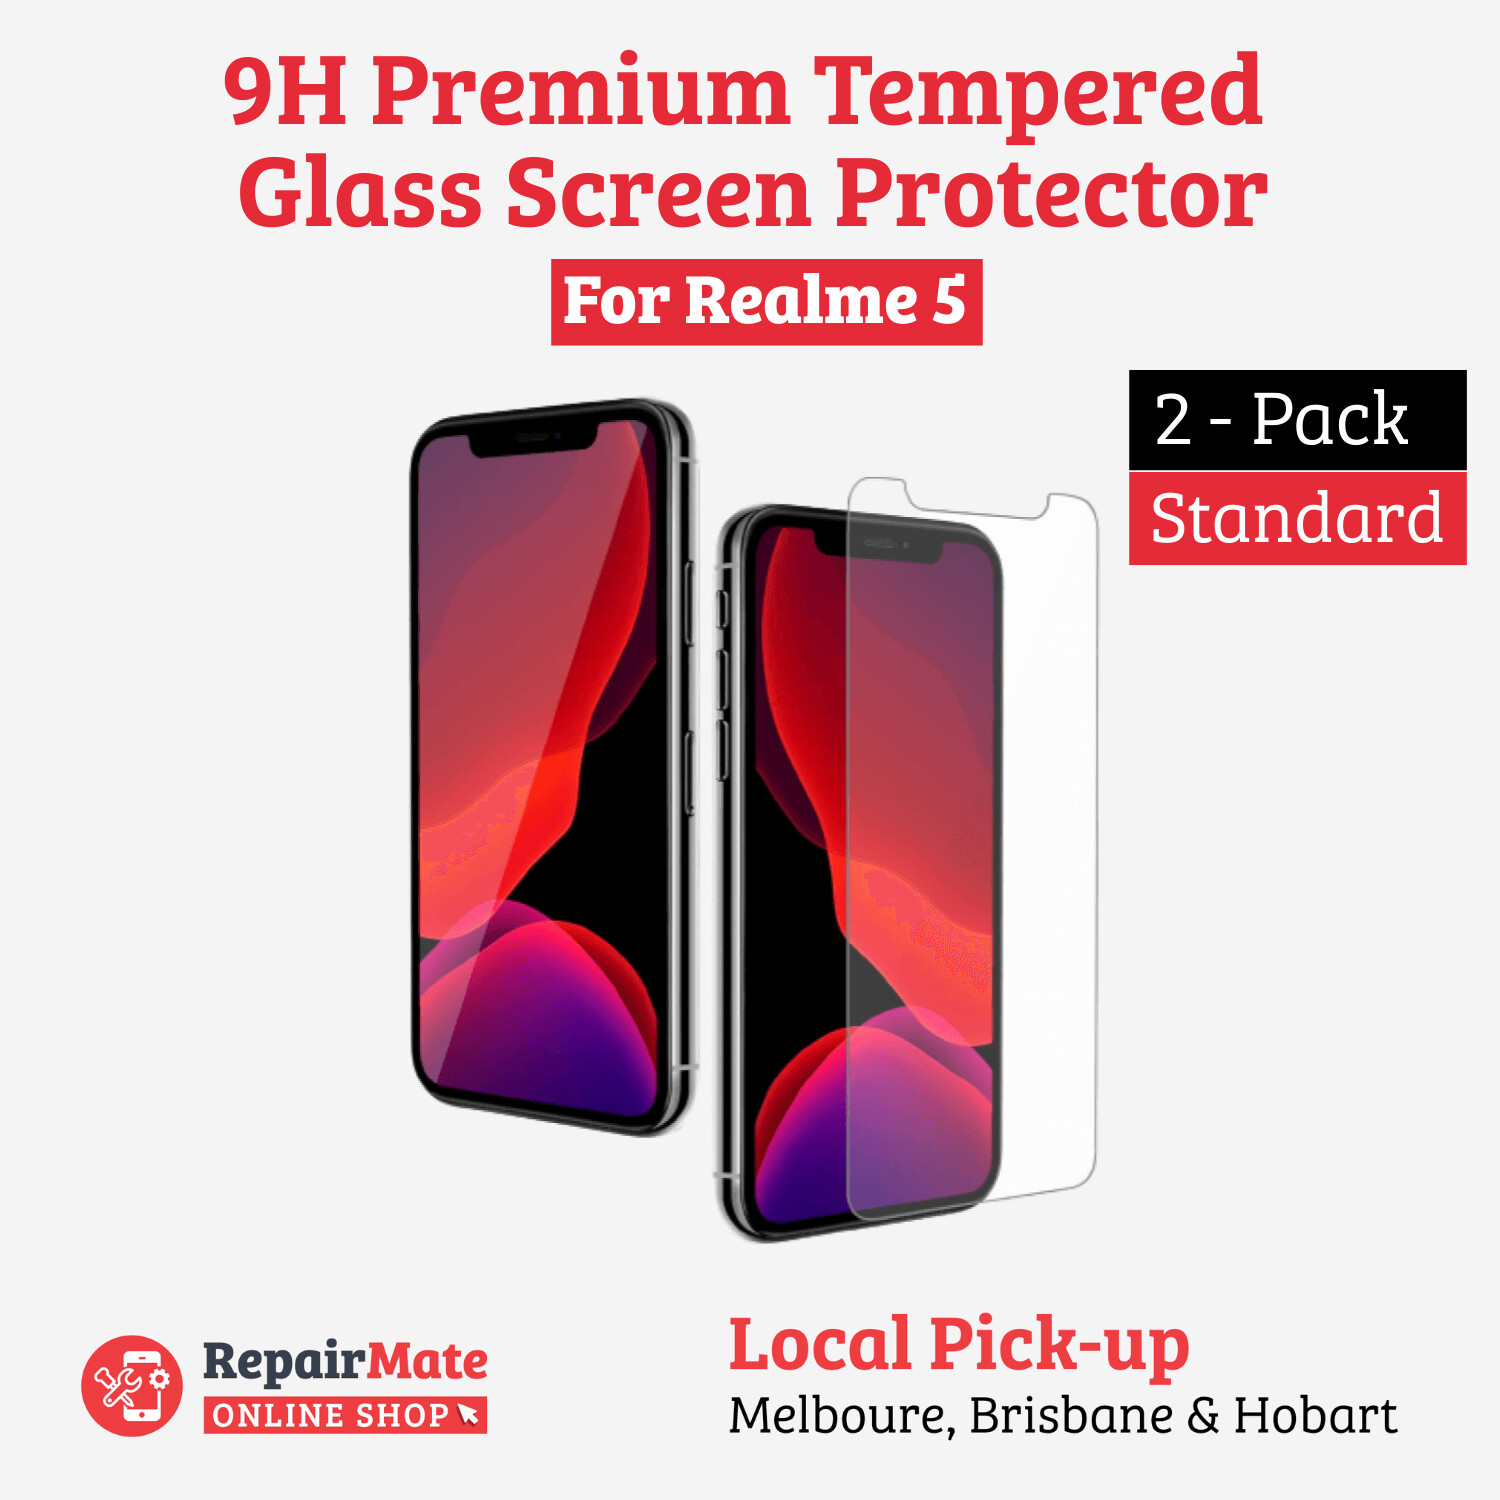 Realme 5 9H Premium Tempered Glass Screen Protector [2 Pack]